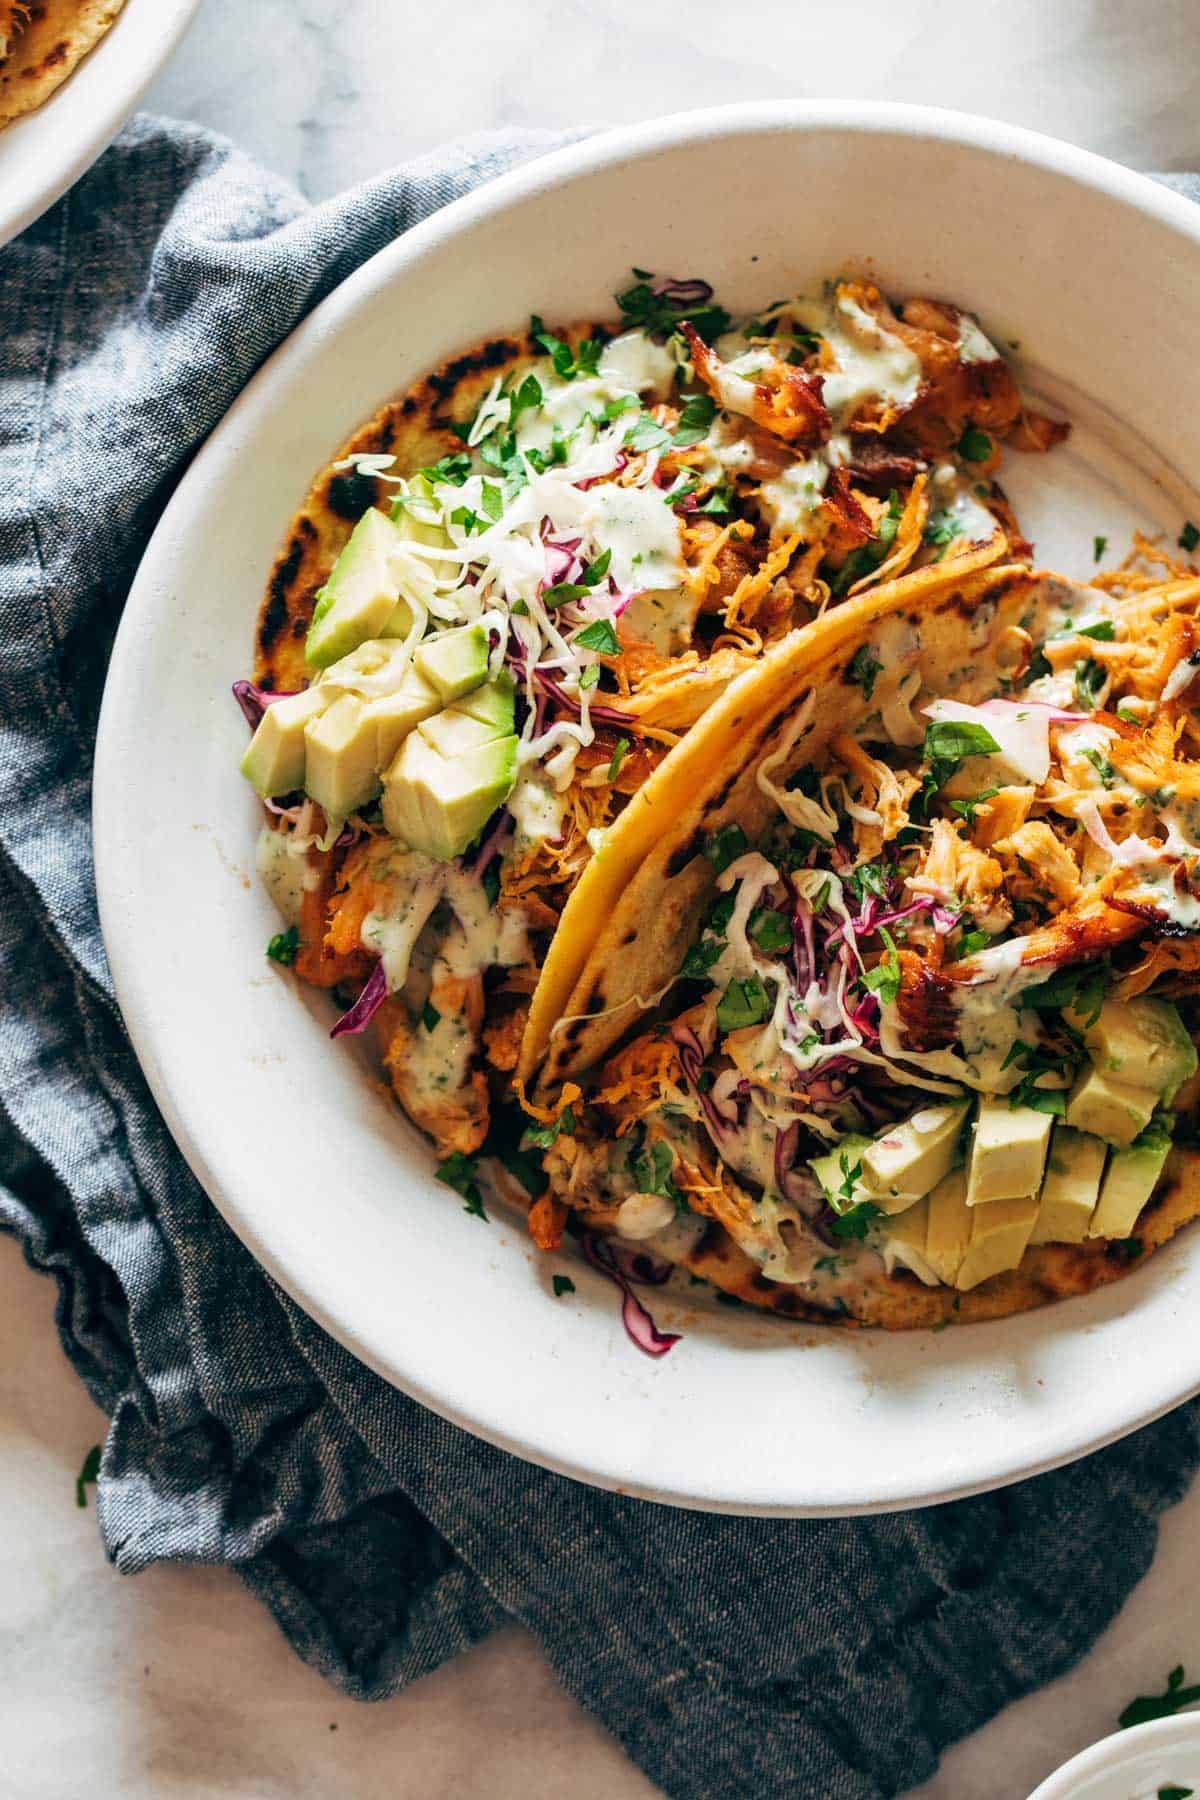 Buffalo chicken tacos on a plate with avocado and slaw.